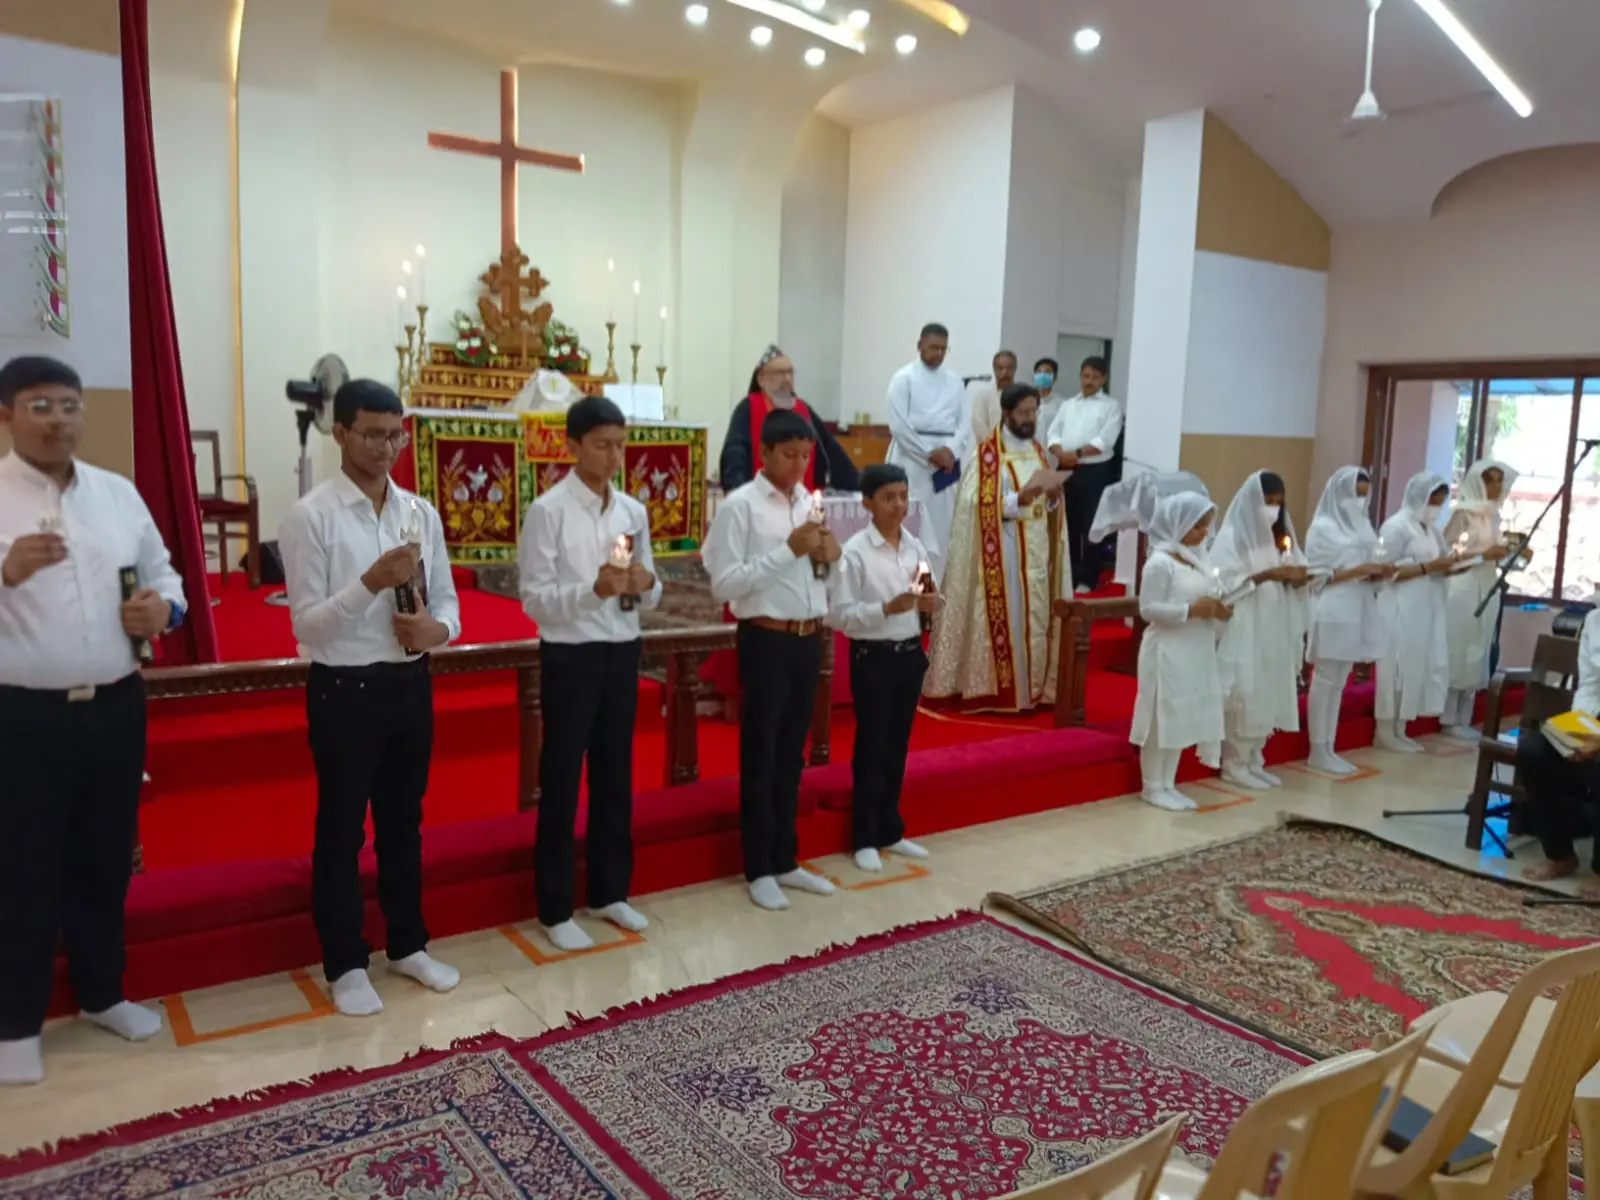 First Communicants with the Bishop